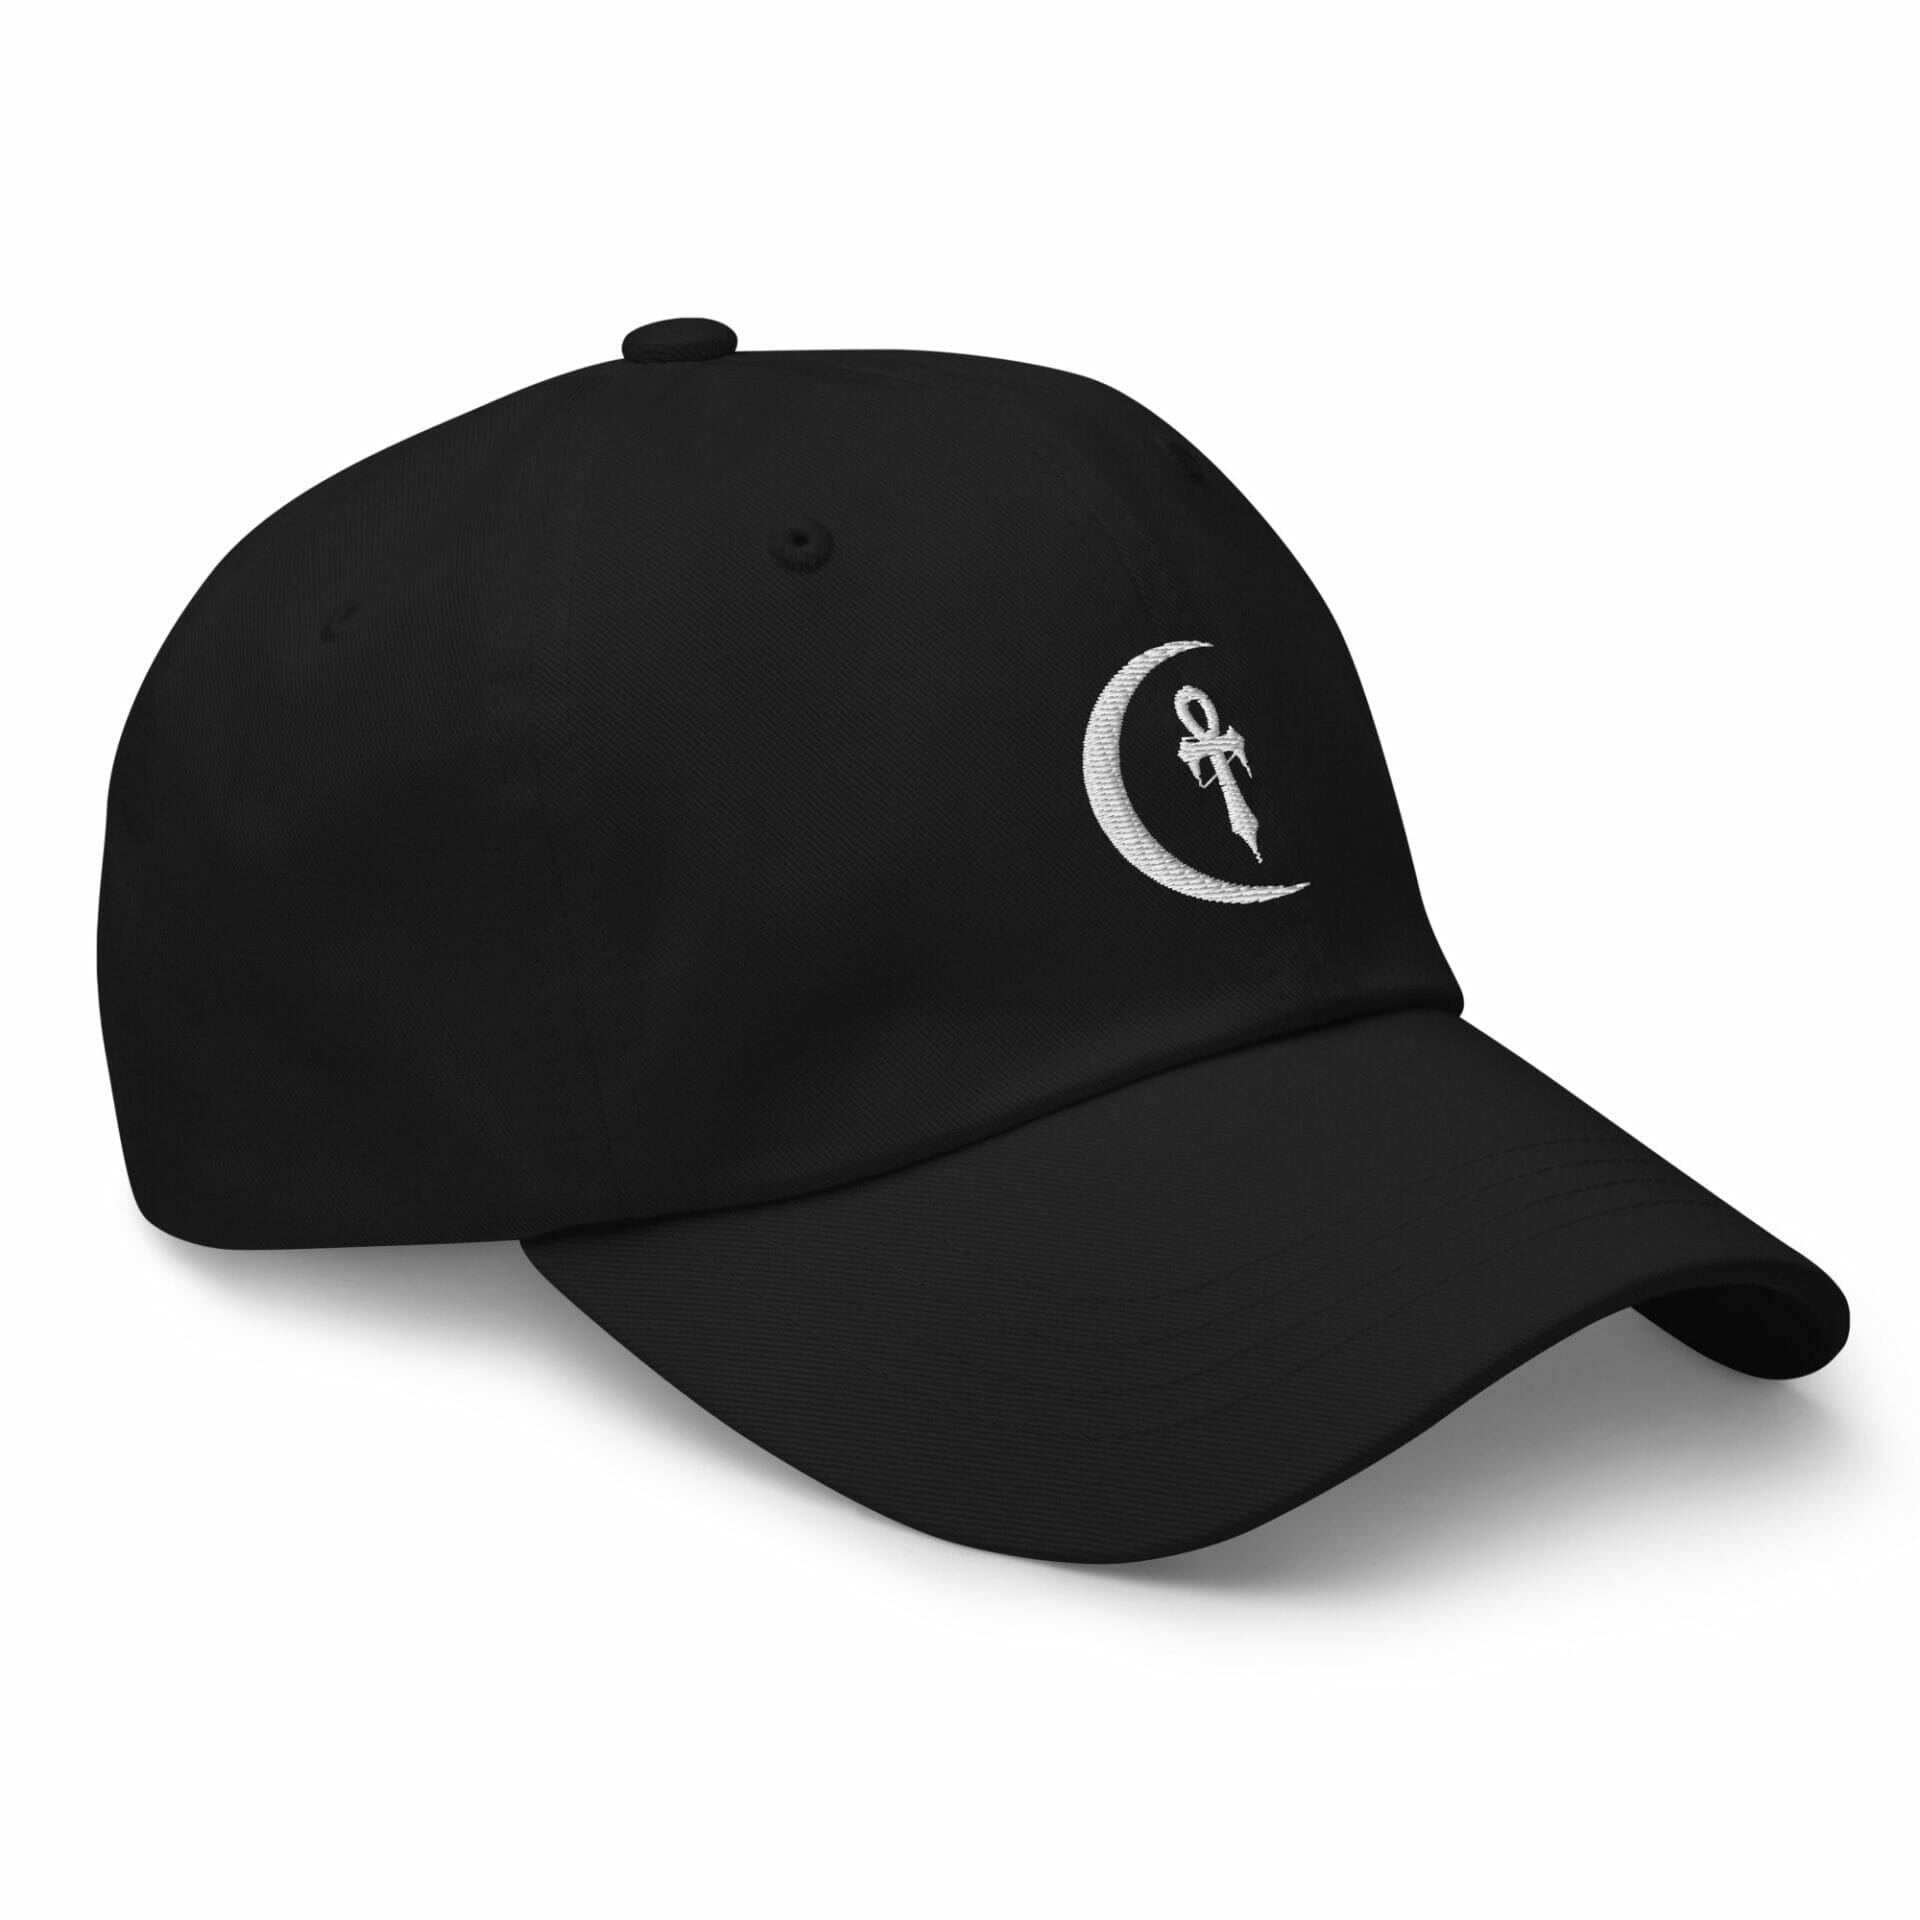 classic-dad-hat-black-right-front-6495dac2889a9